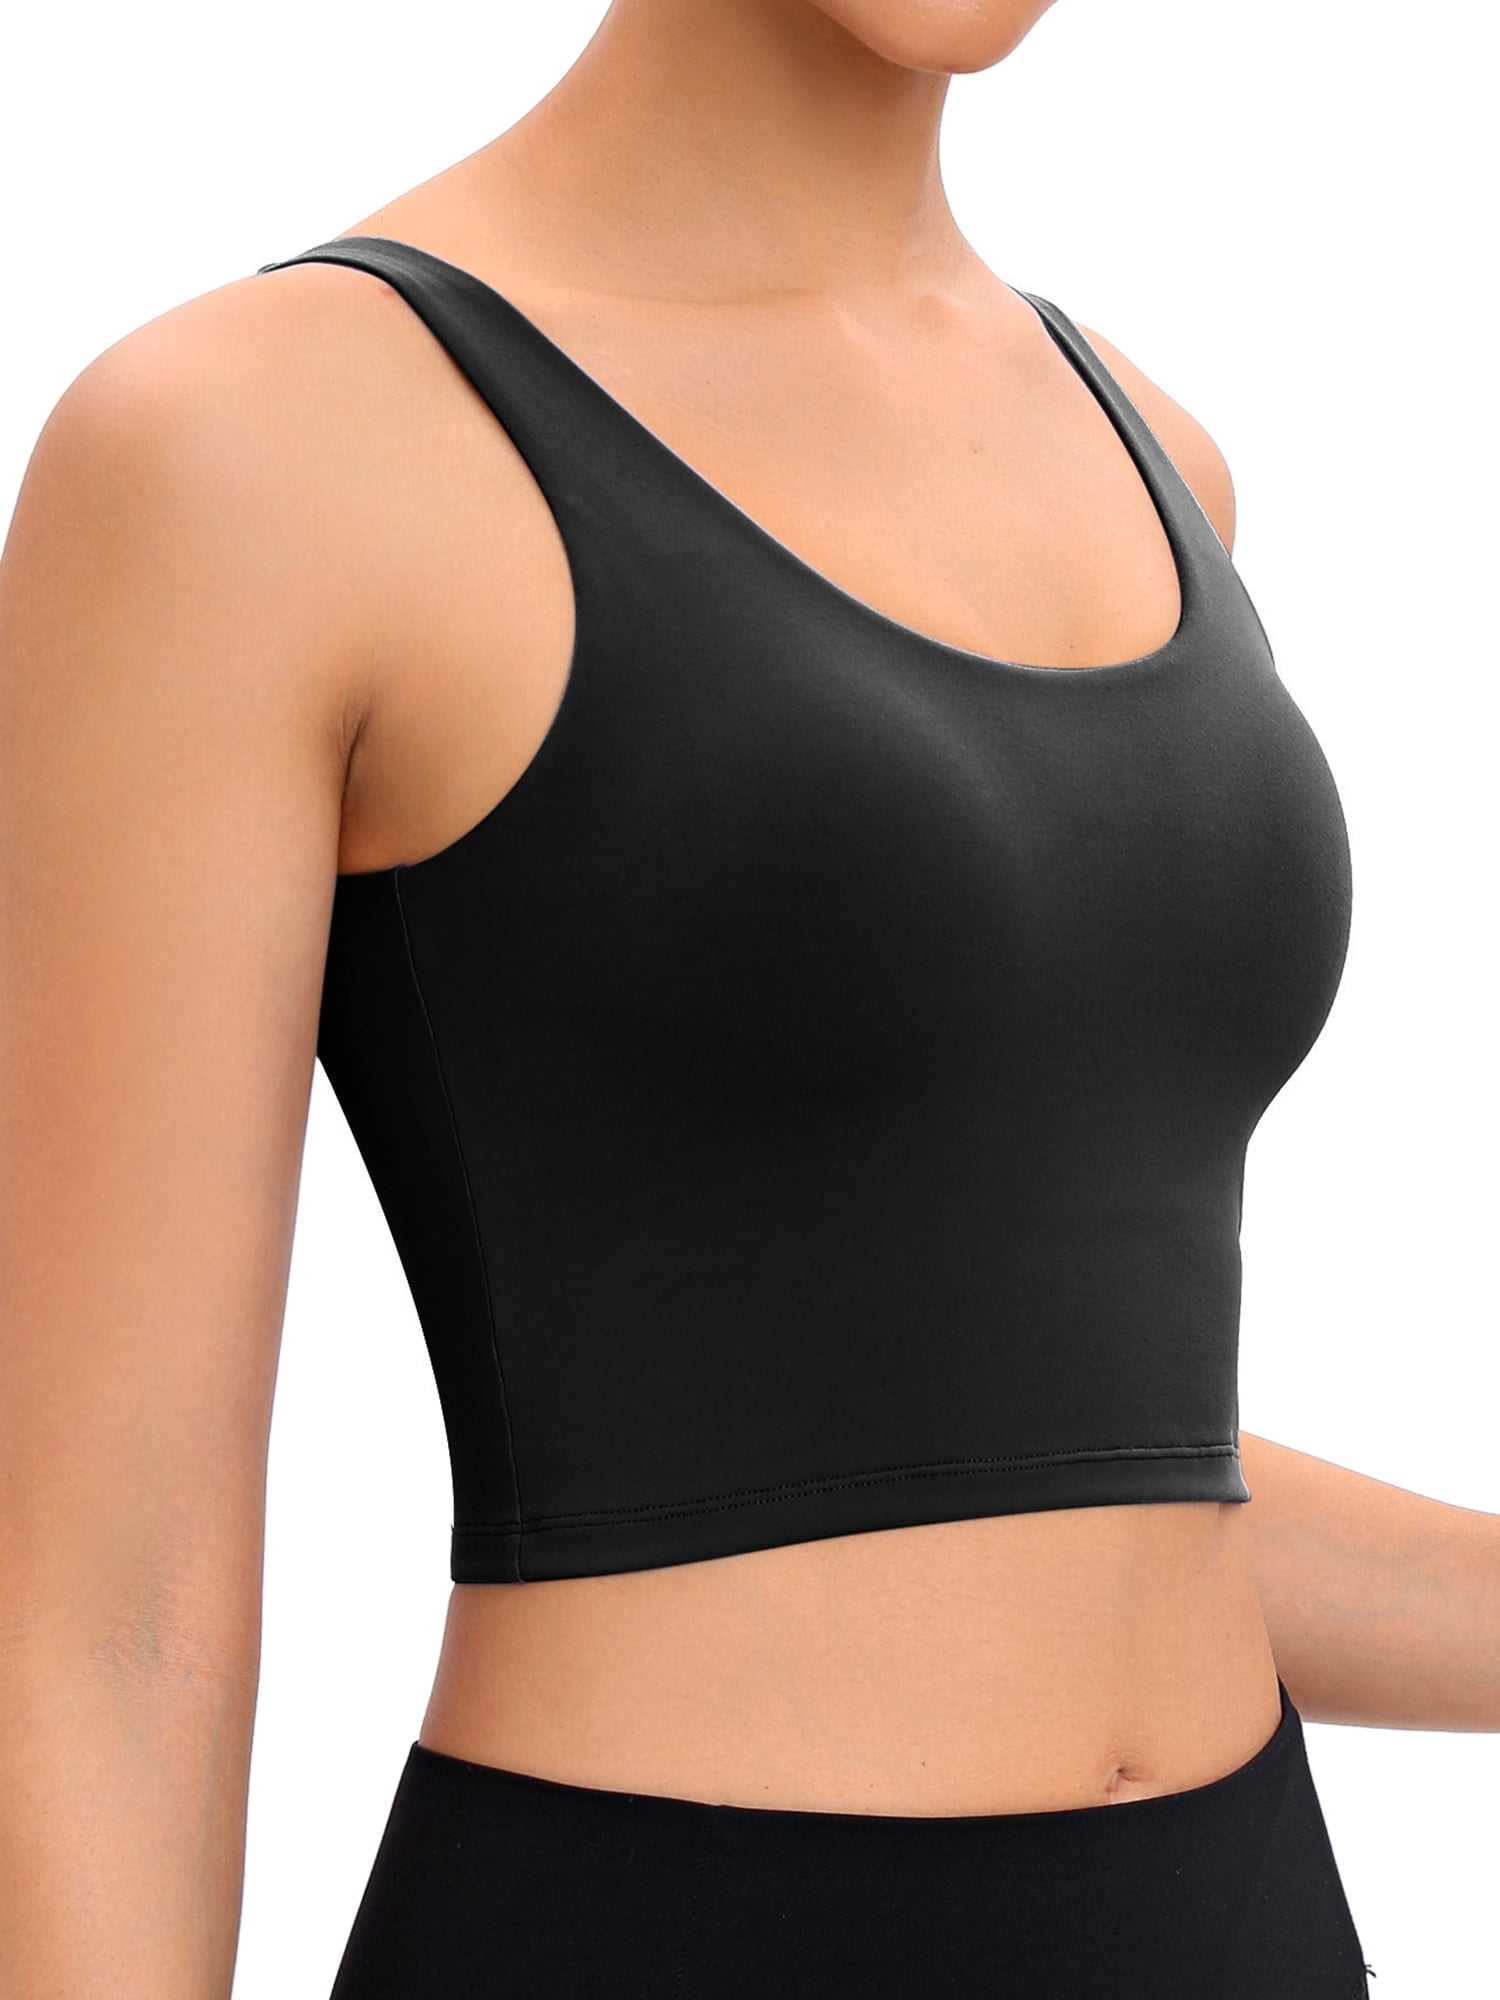 FOCUSSEXY Women's Yoga Tank with Built in Bra, Padded Sports Bra